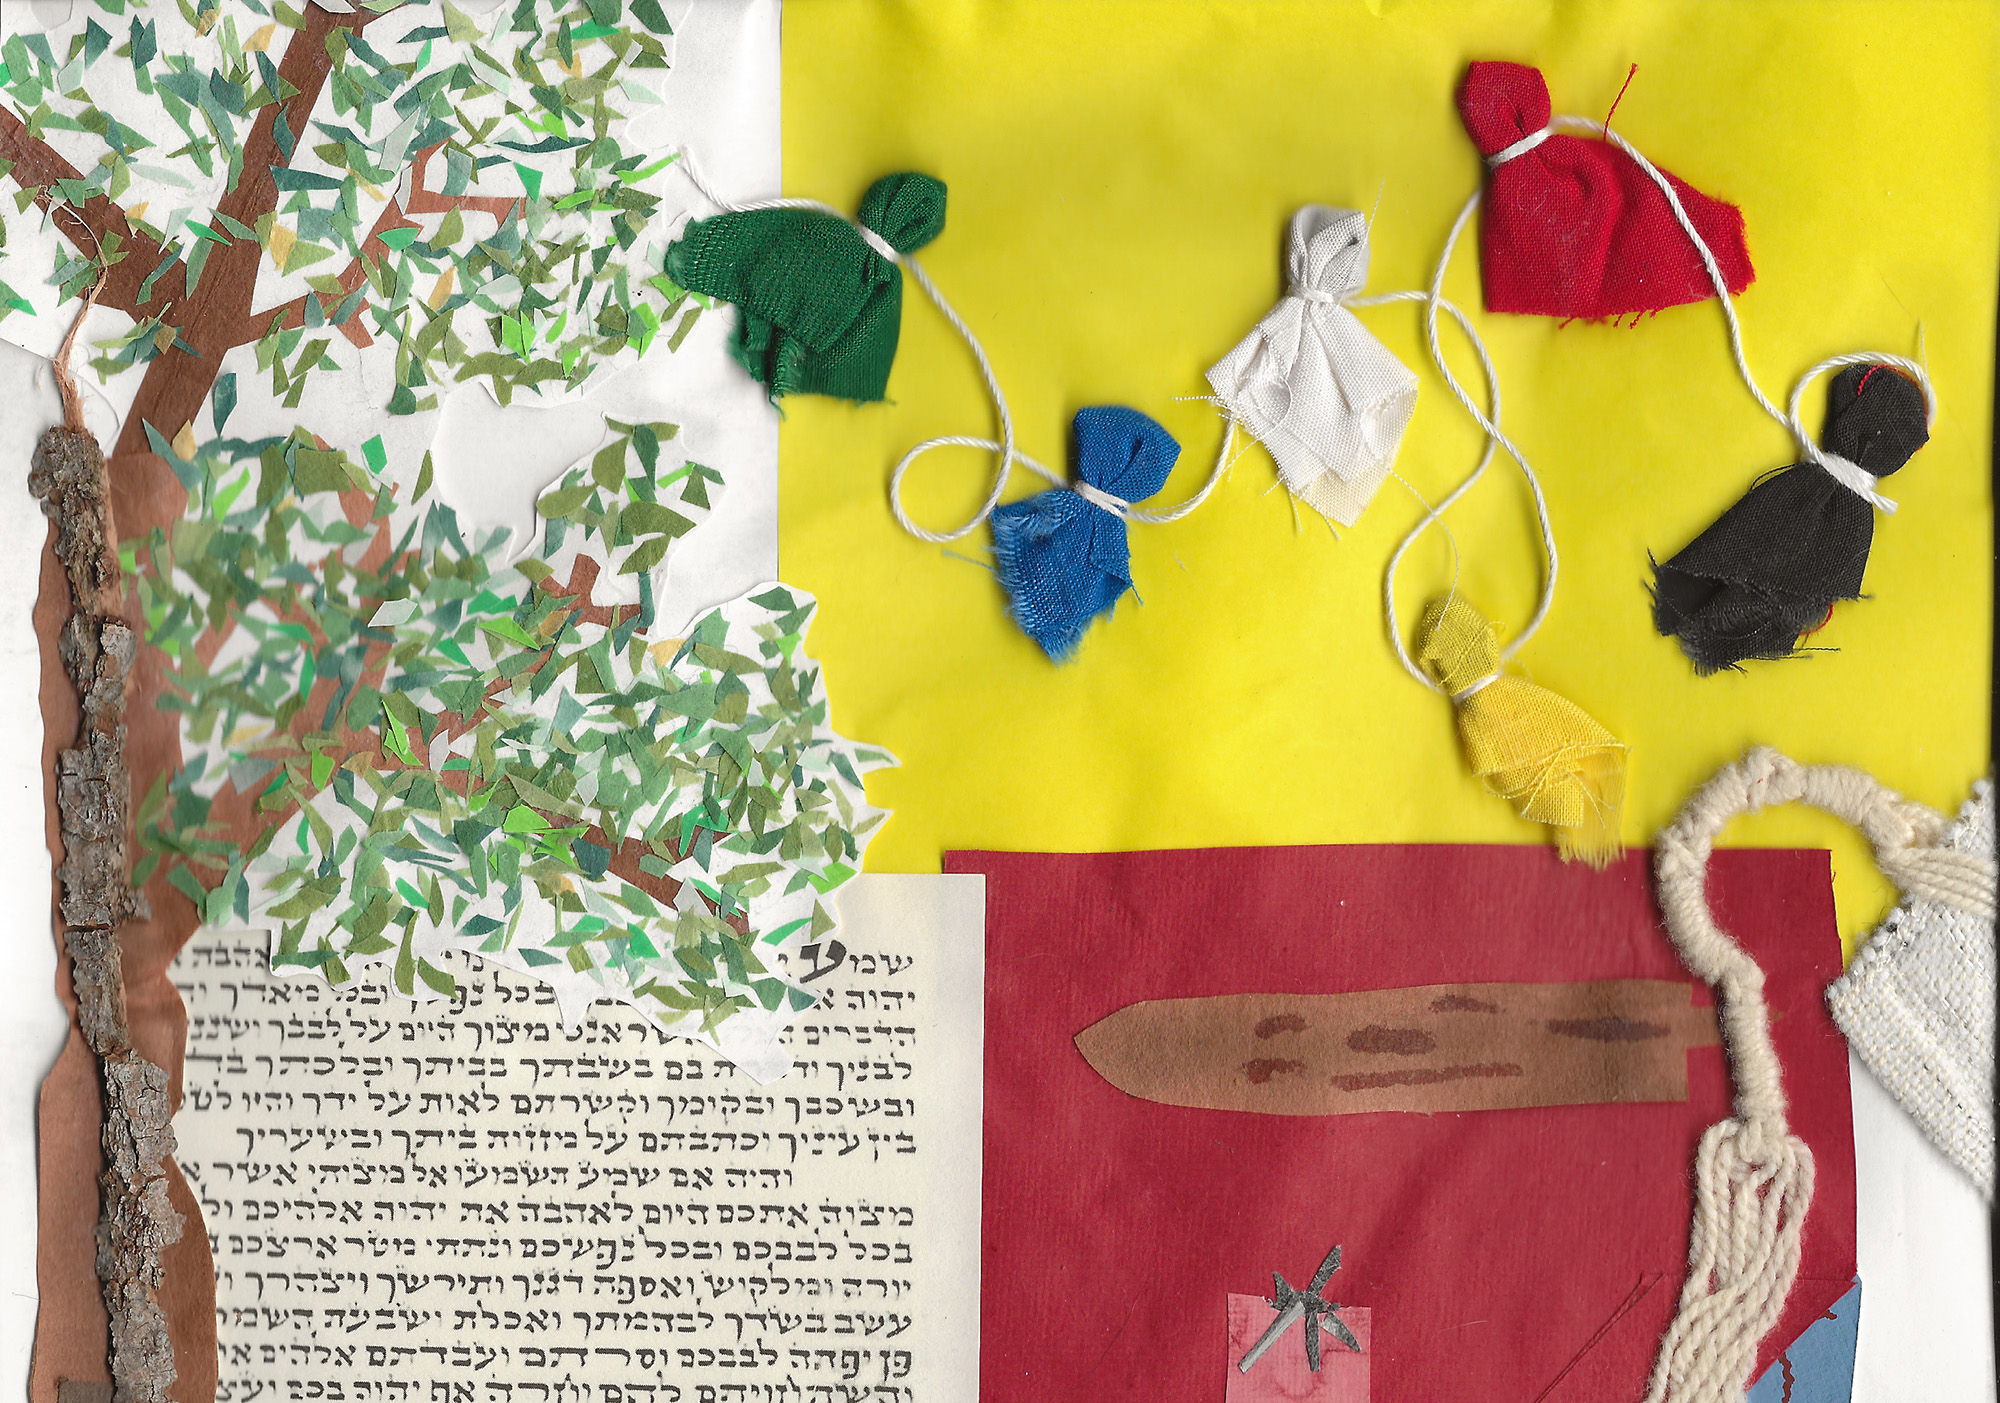 A collage with four sections, including a tree, hebrew text, a red square with a white fringe, and small pieces of green, blue, white, red, yellow, and black cloth tied together on a yellow background.